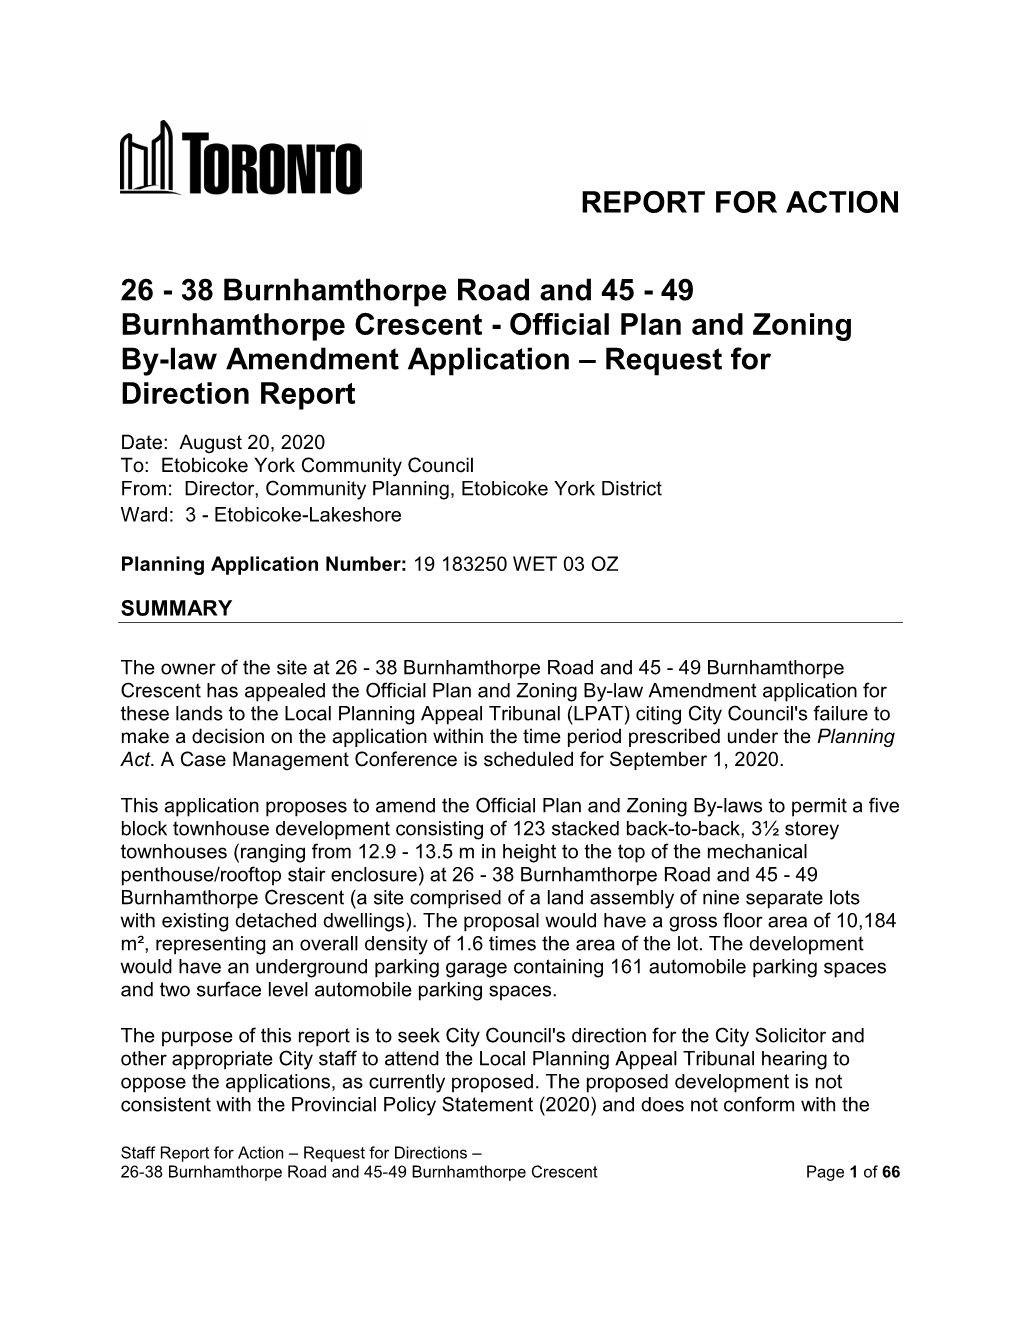 26 - 38 Burnhamthorpe Road and 45 - 49 Burnhamthorpe Crescent - Official Plan and Zoning By-Law Amendment Application – Request for Direction Report